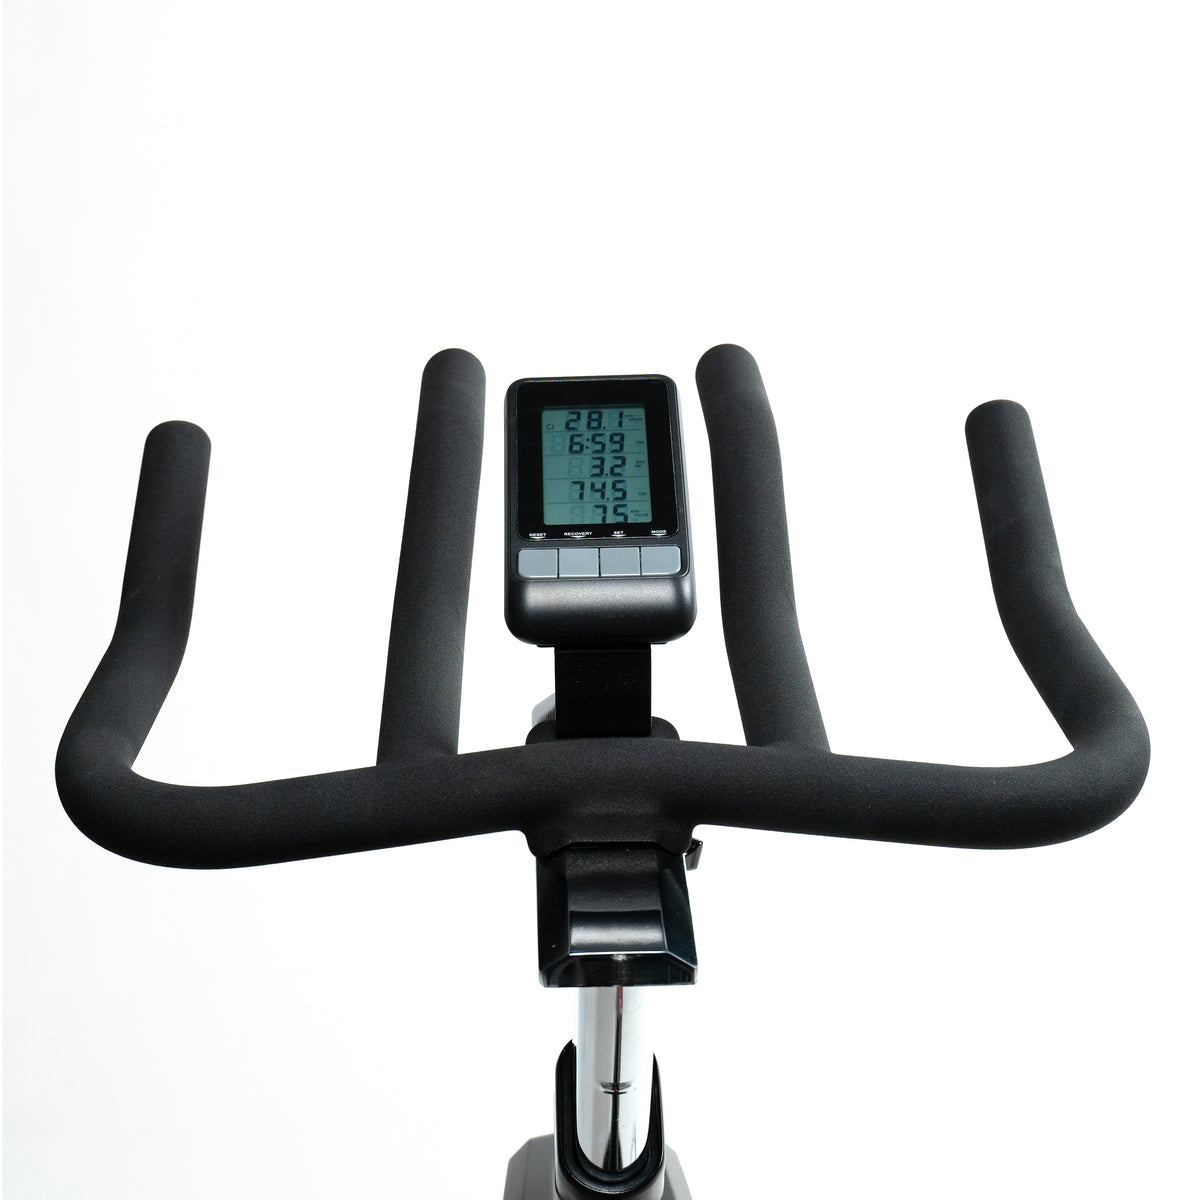 FitWay Equip. 1000IC Indoor Cycle console view 